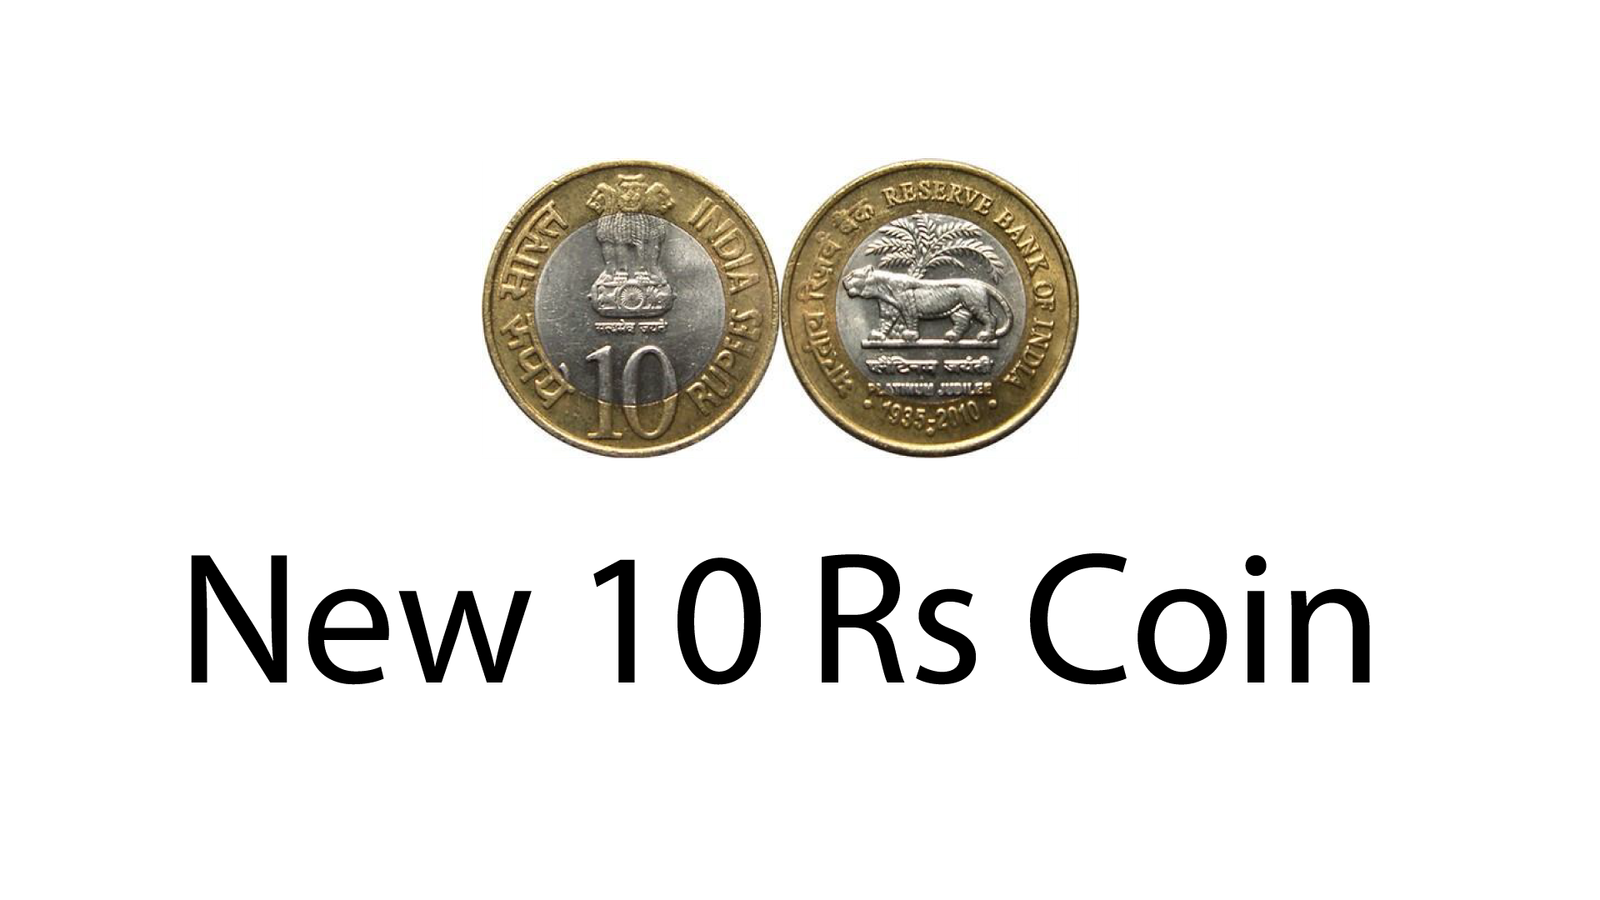 The new INR 10 Coin